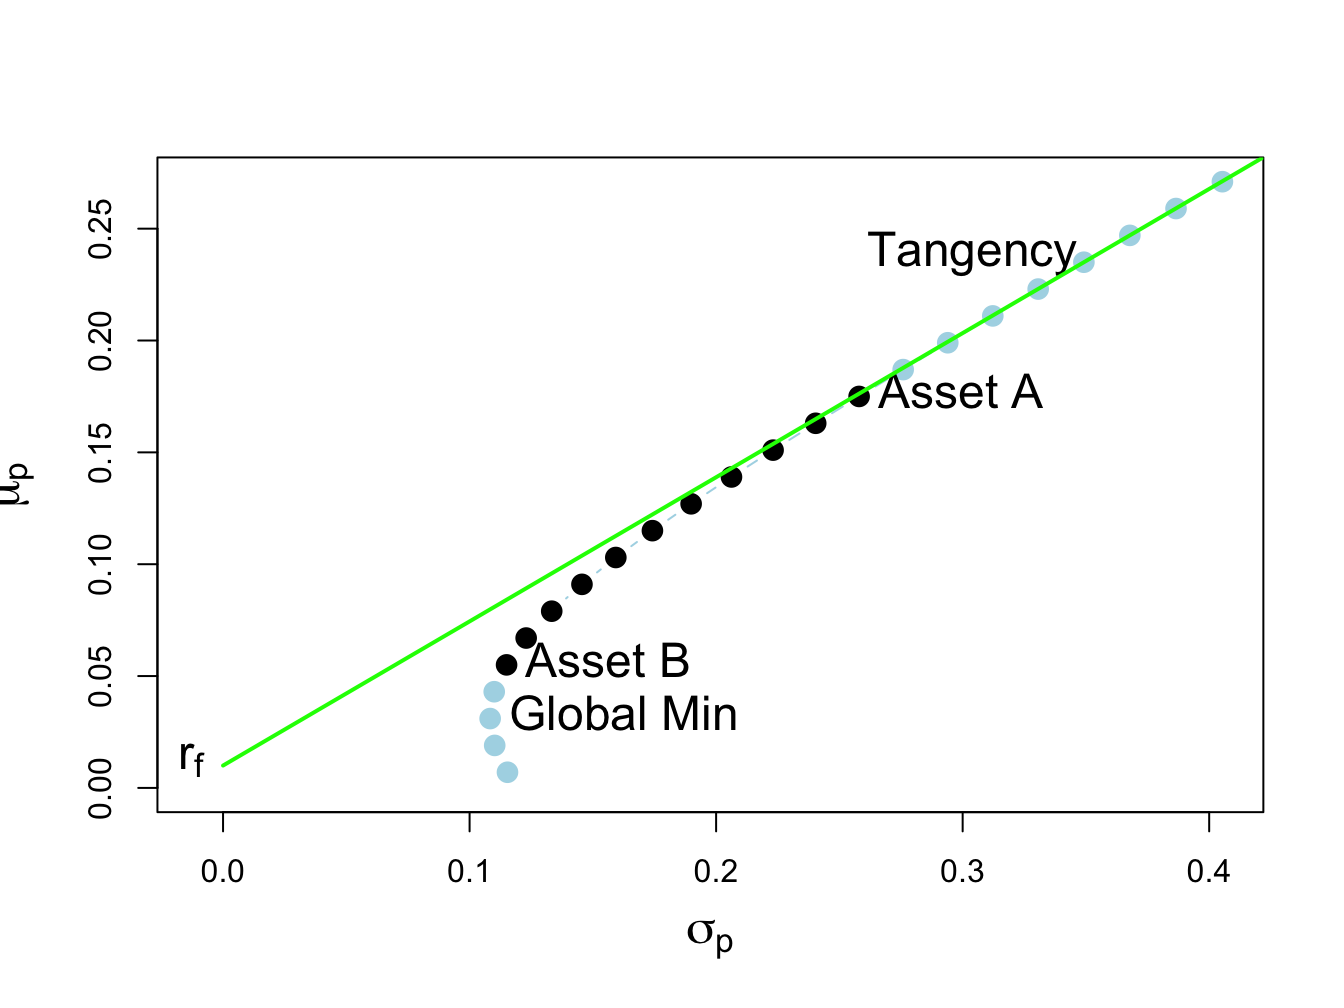 Efficient portfolios of two risky assets plus a risk free asset: $\rho_{AB}=0.7$ and $r_{f}=0.01$. Asset B sold short in unconstrained tangency portfolio. The short sale constrained tangency portfolio is the point labeled "Asset A". 